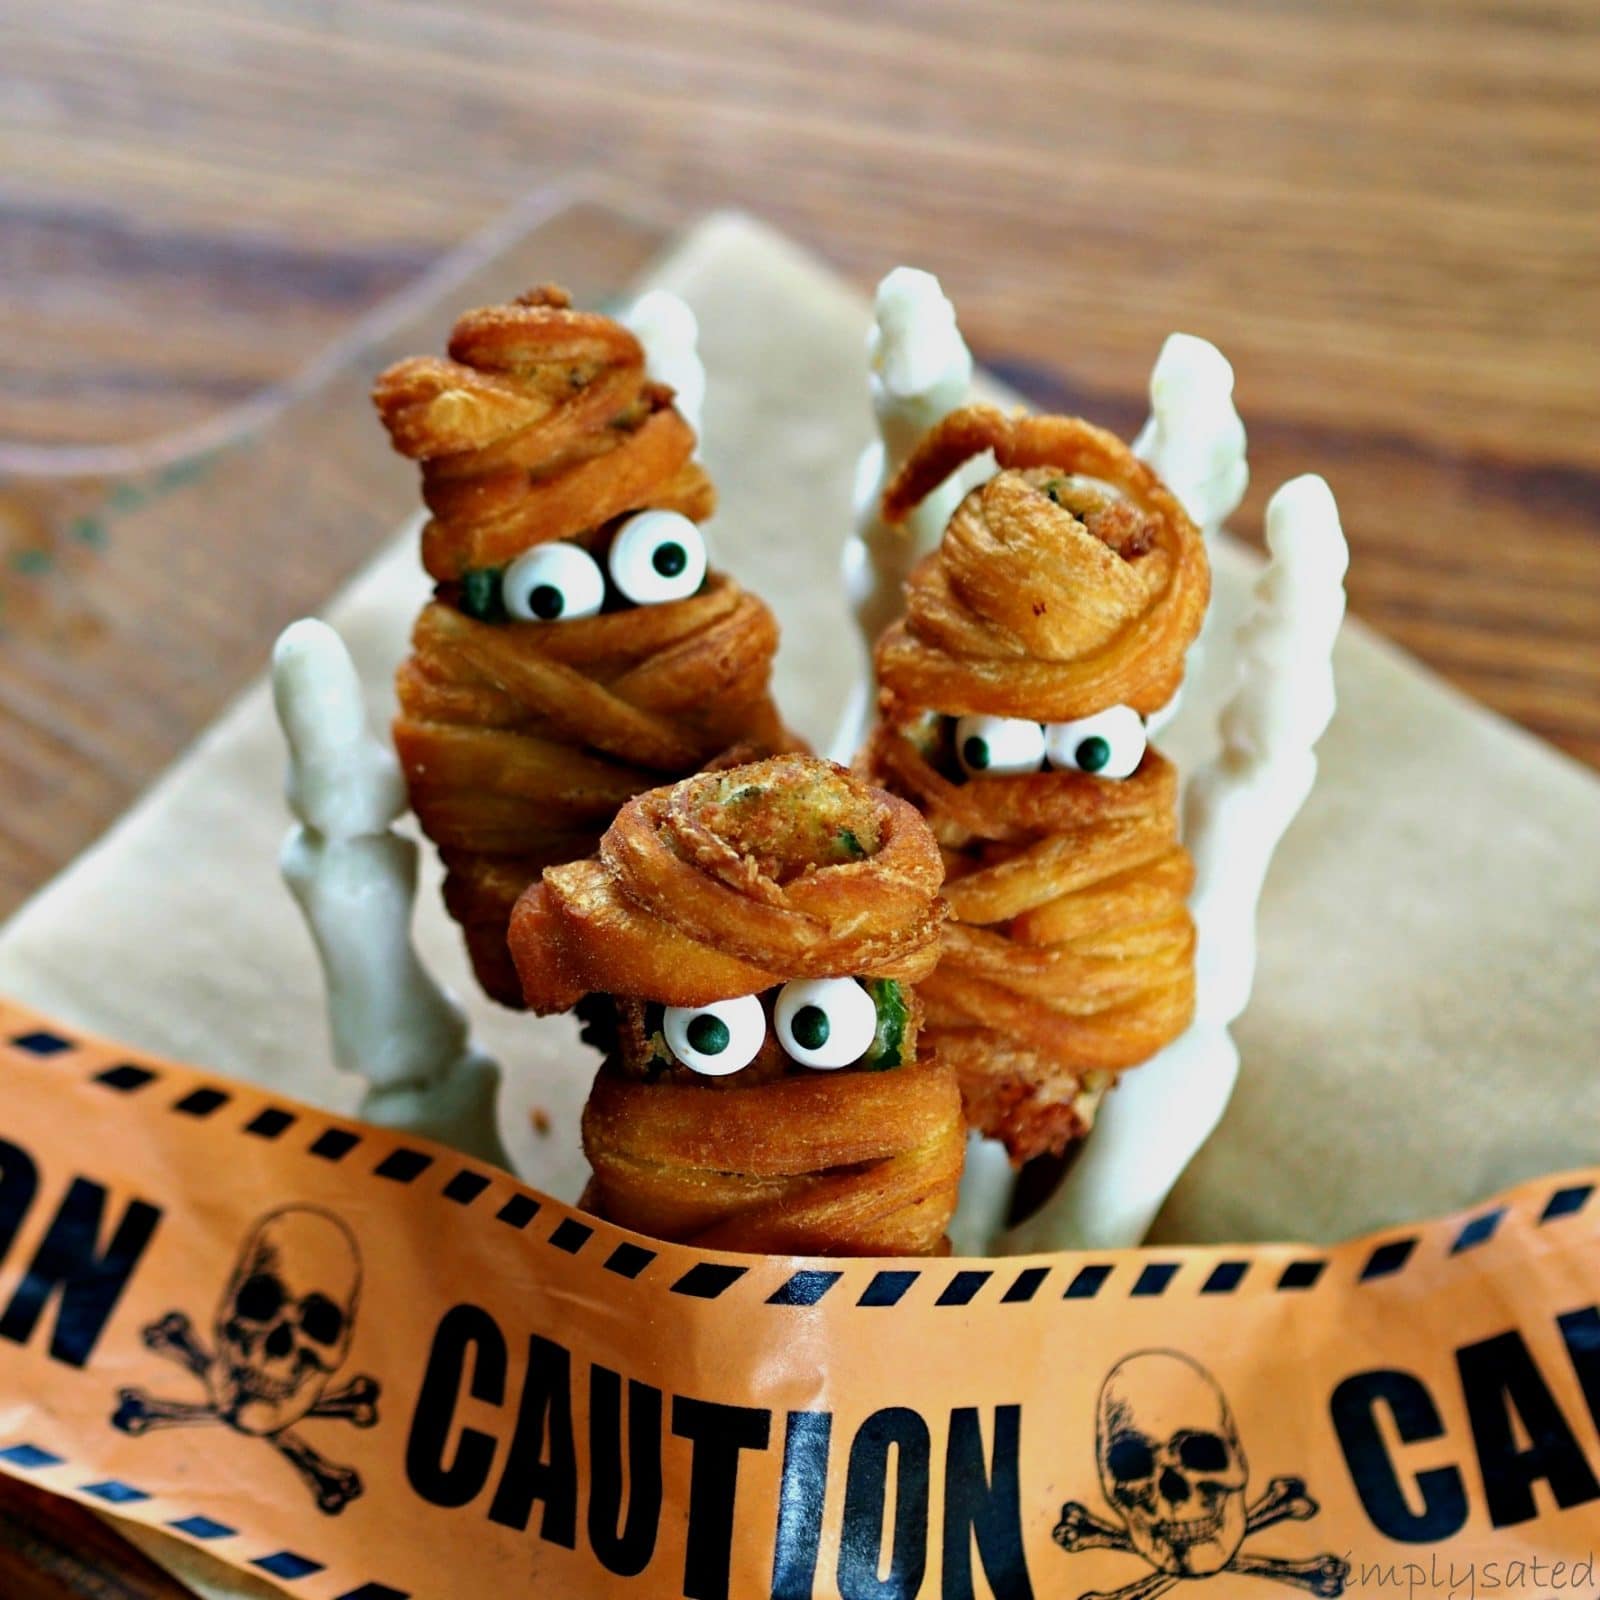 Jalapeno Popper Mummies - a little bit hot, a little bit sweet and a lot of fun. Jalapeno Popper Mummies are the perfect Halloween treat.